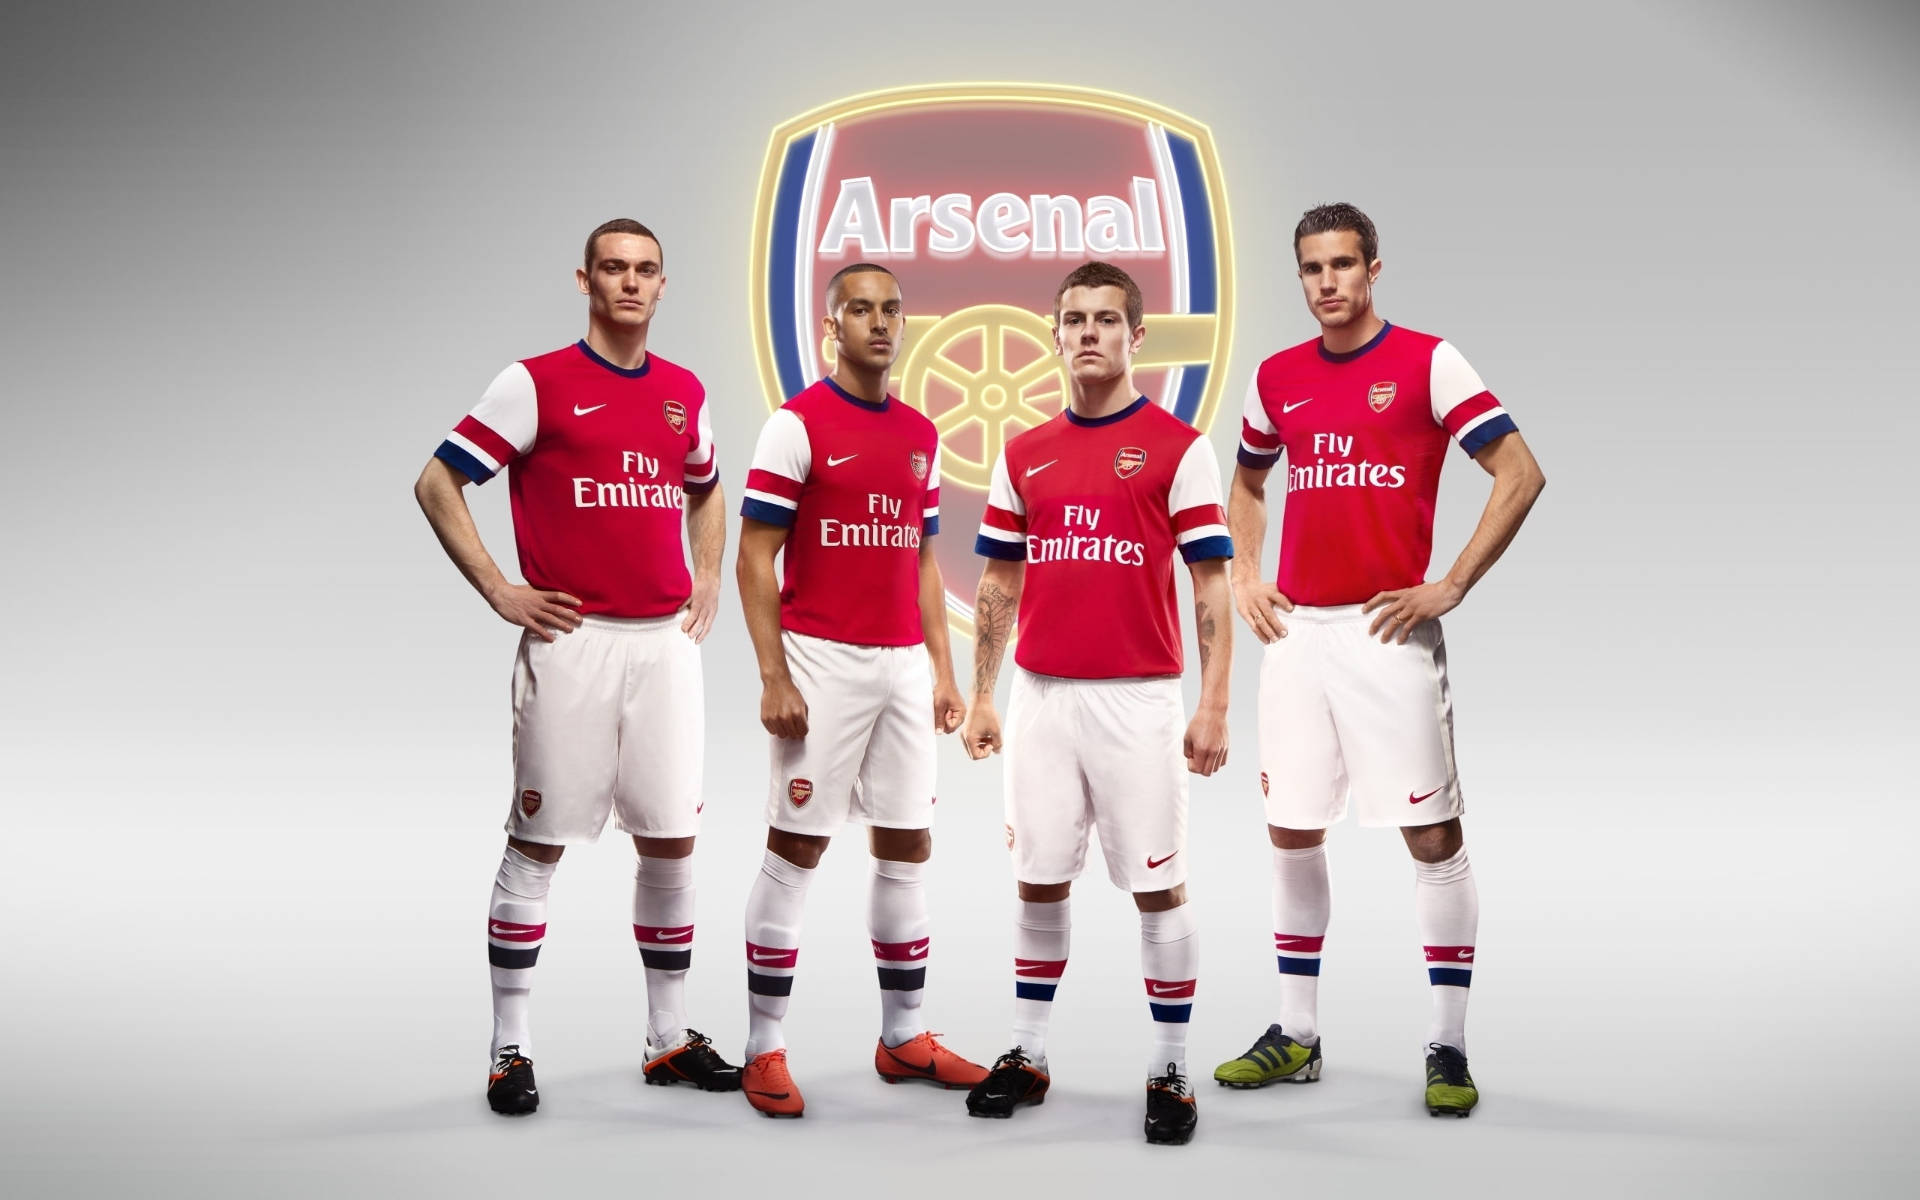 Arsenal Logo And Players Background